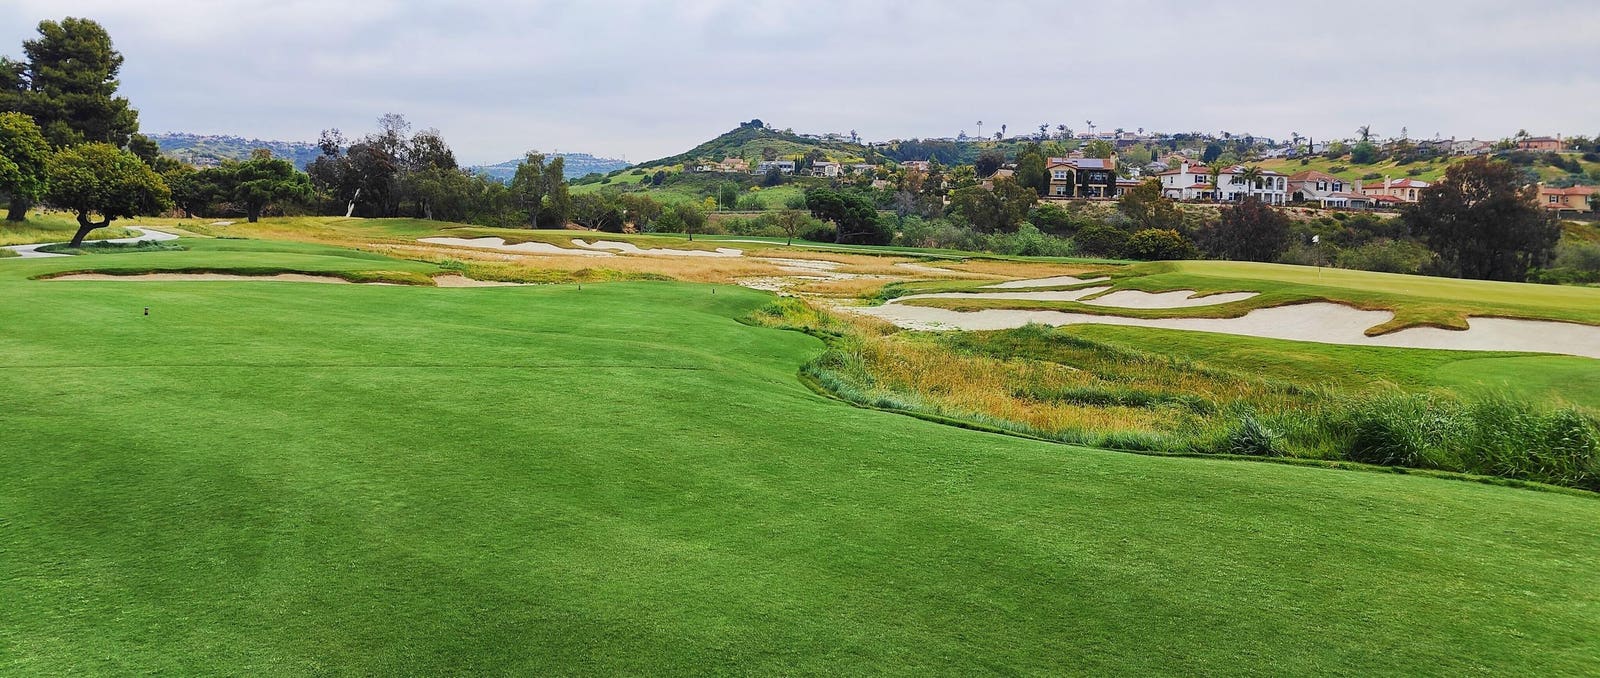 Southern California’s Newest Golf Course Opens...And Wow